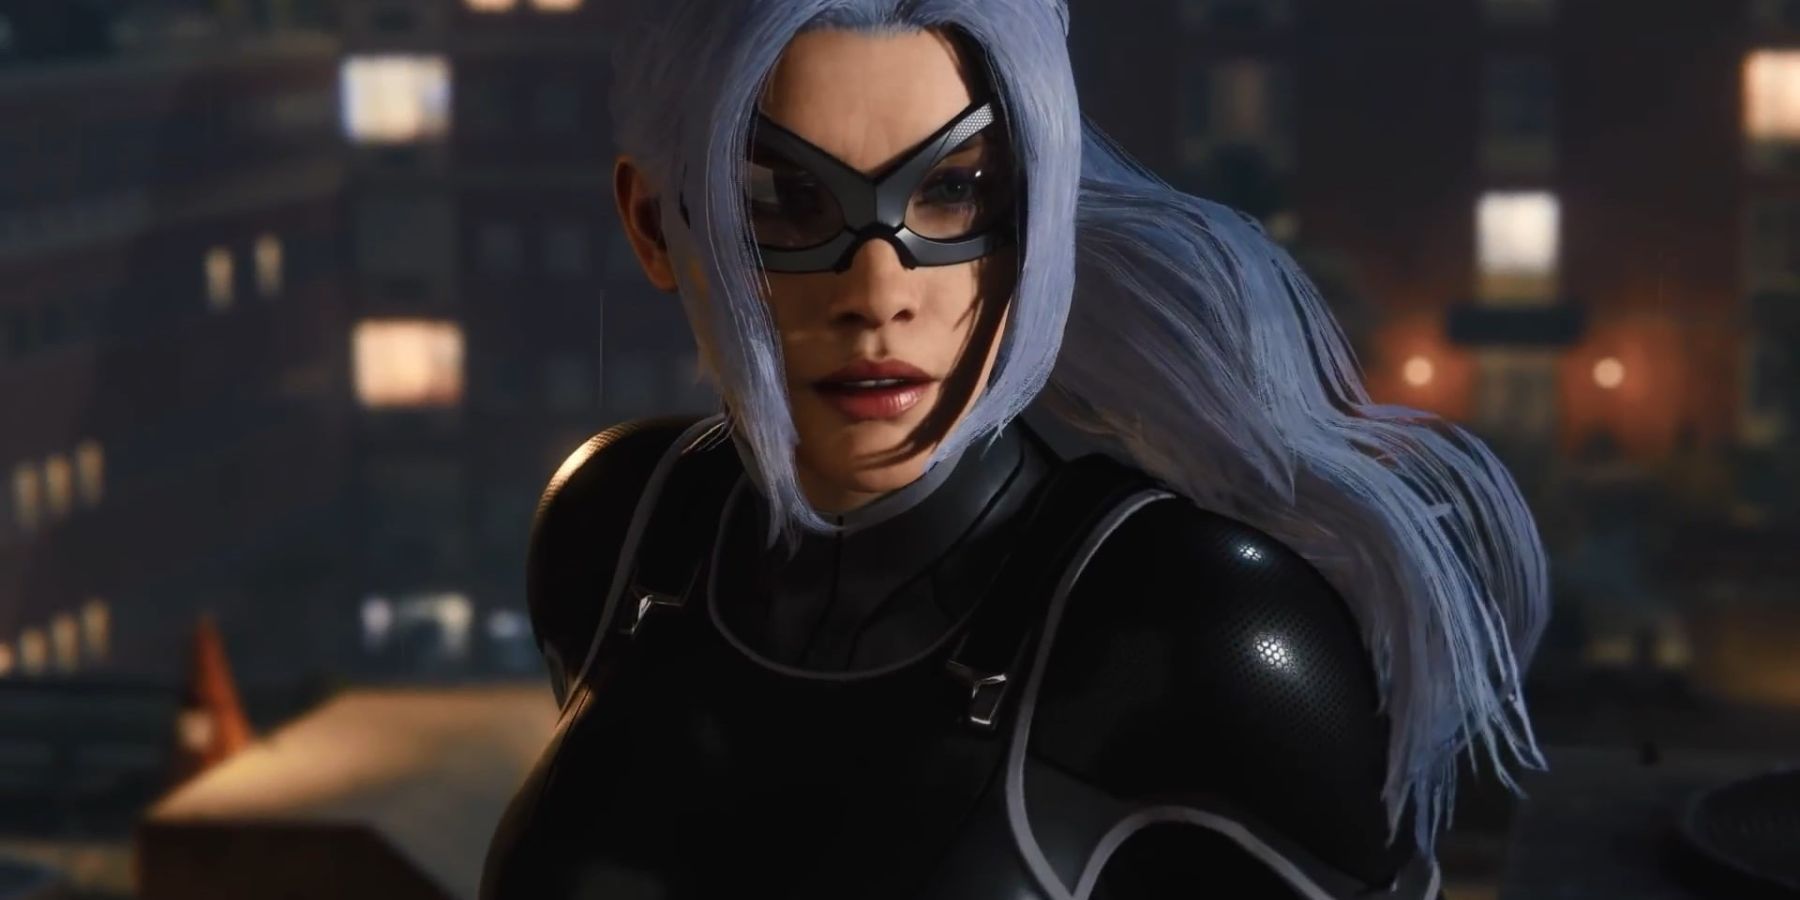 Why Marvel's Spider-Man 2 May or May Not Have Its Own DLC